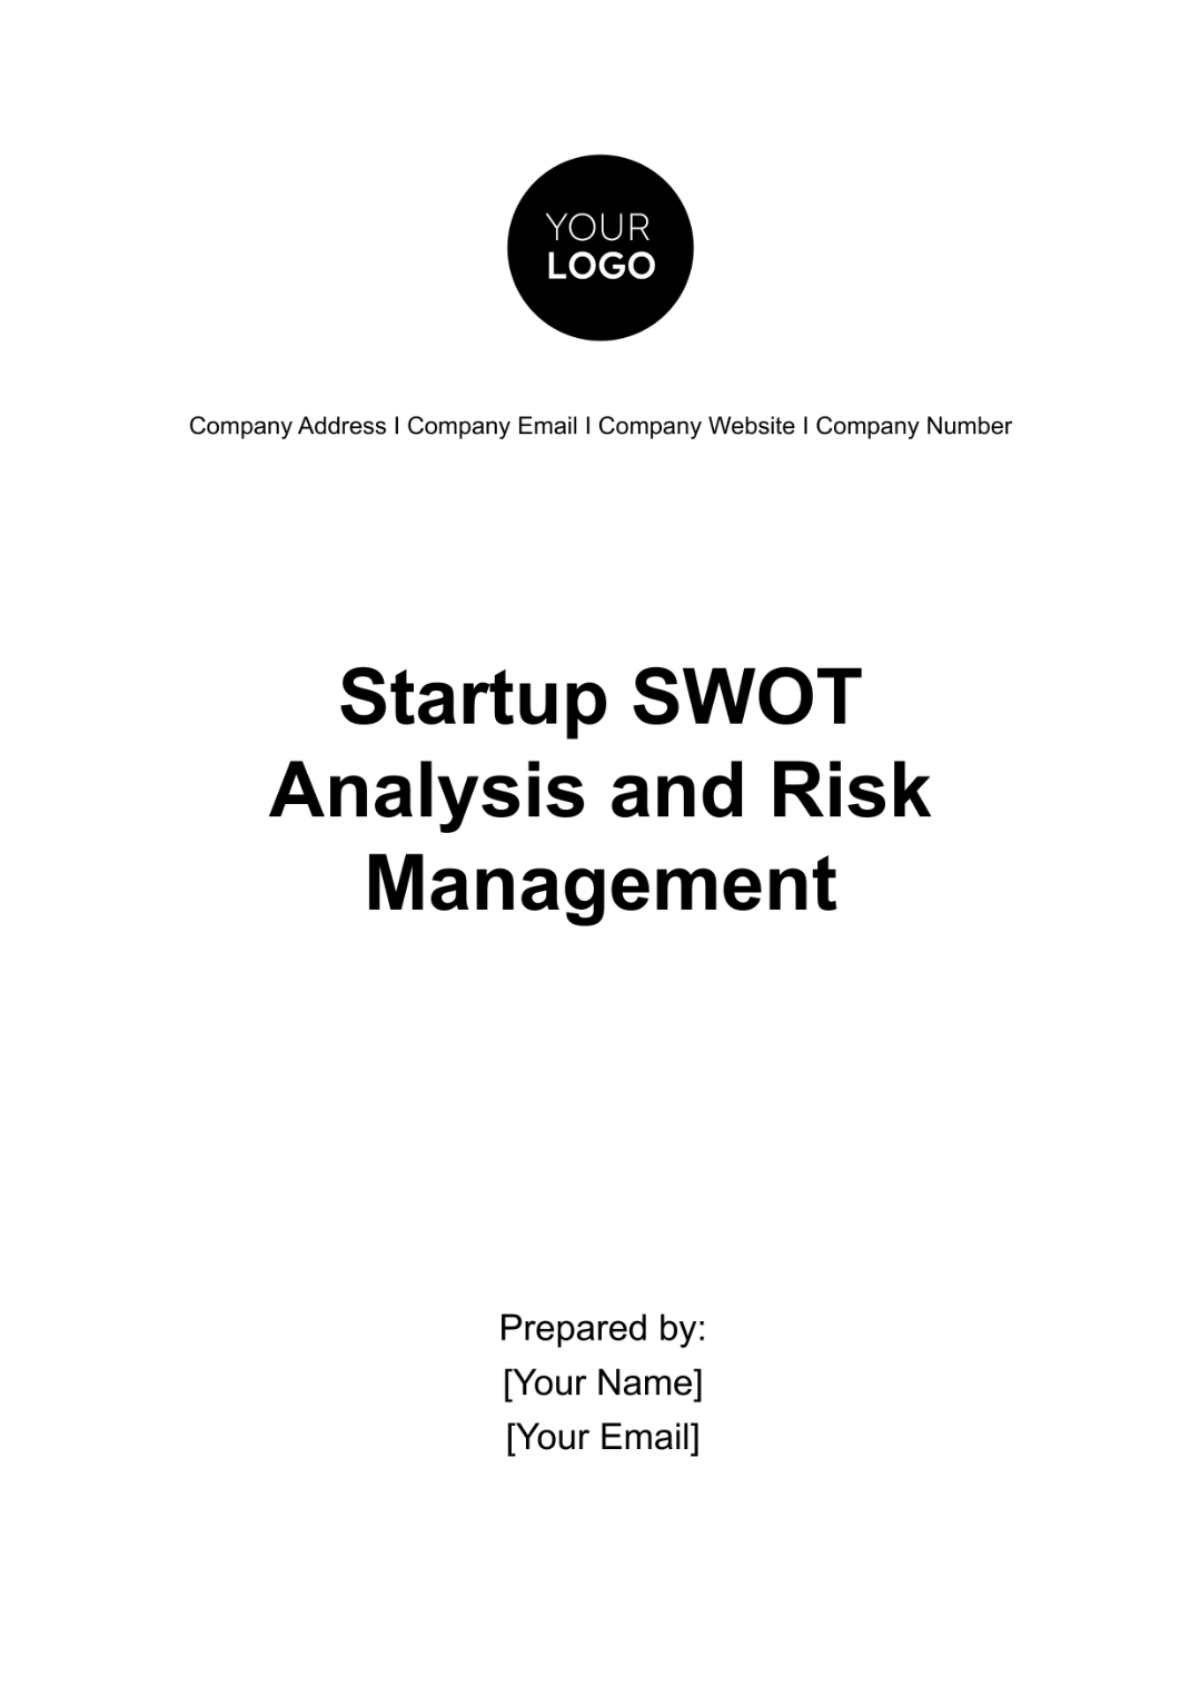 Startup SWOT Analysis and Risk Management Plan Template